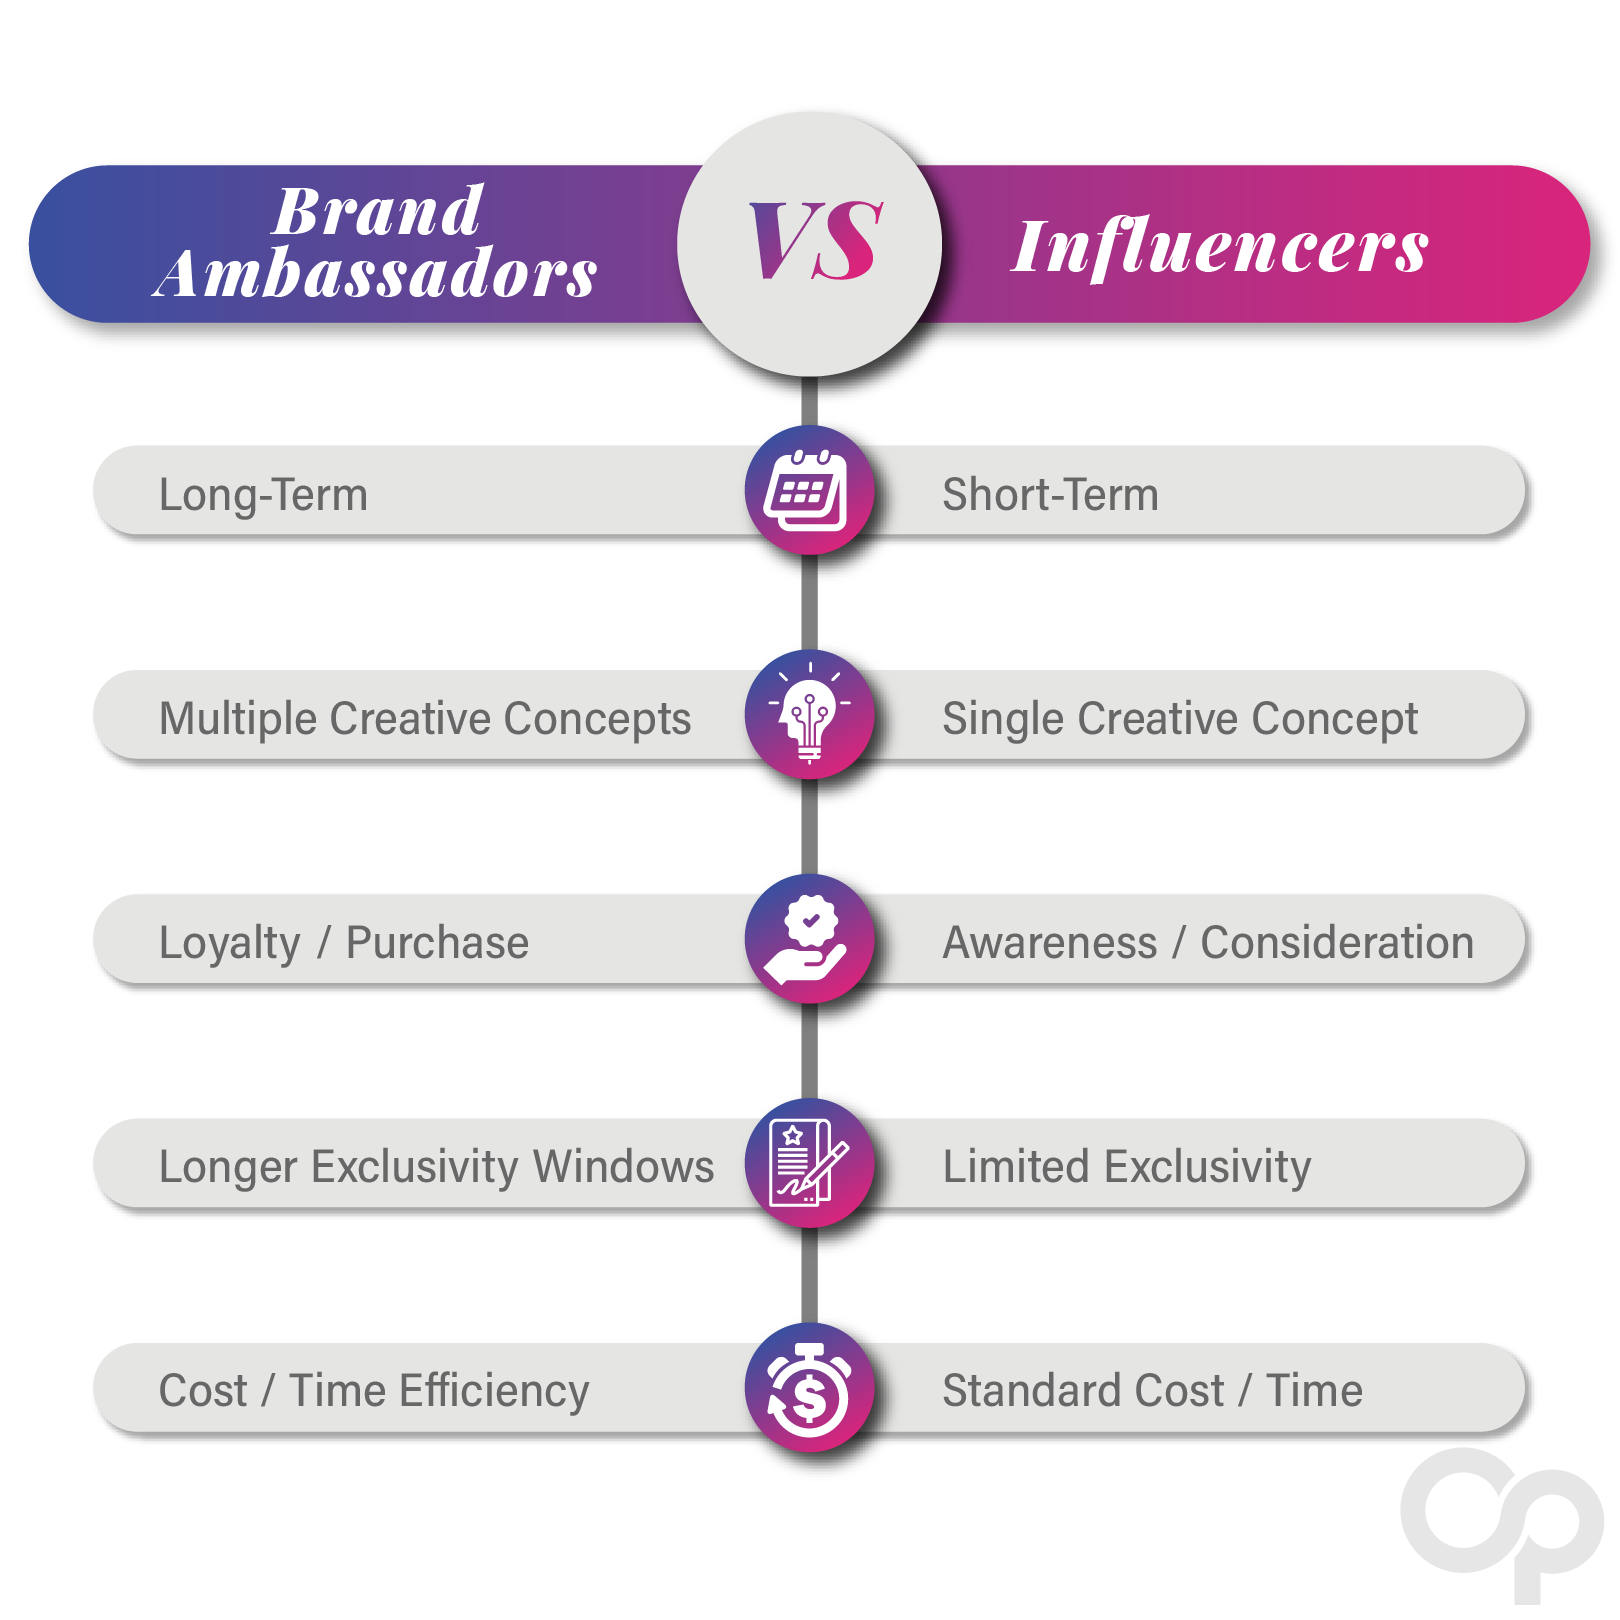 Weigh out what would best suit your campaign: brand ambassadors or influencers.